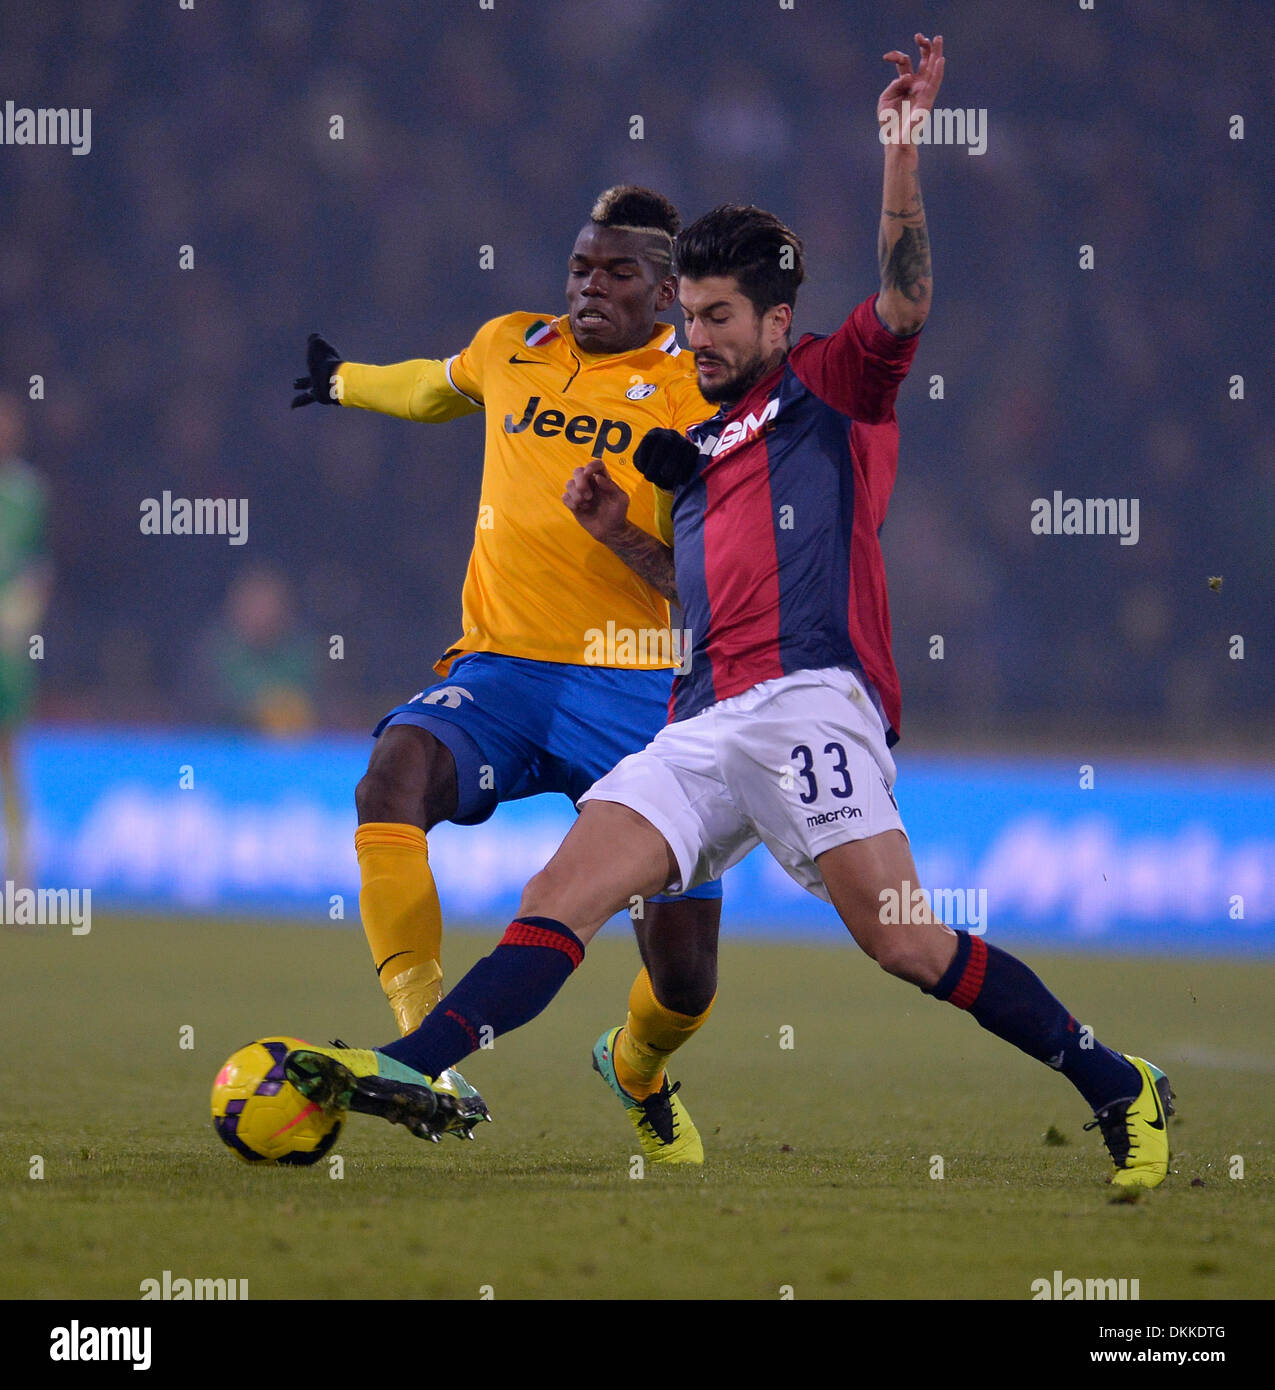 Bologna, Italy. 6thDec, 2013. Juventus' Paul Pogba (R) vies with Bologna's Panagiotis Kone during their Italian Serie A soccer match in Bologna, Italy, December 6, 2013. Juventus won 2-0. Credit:  Alberto Lingria/Xinhua/Alamy Live News Stock Photo